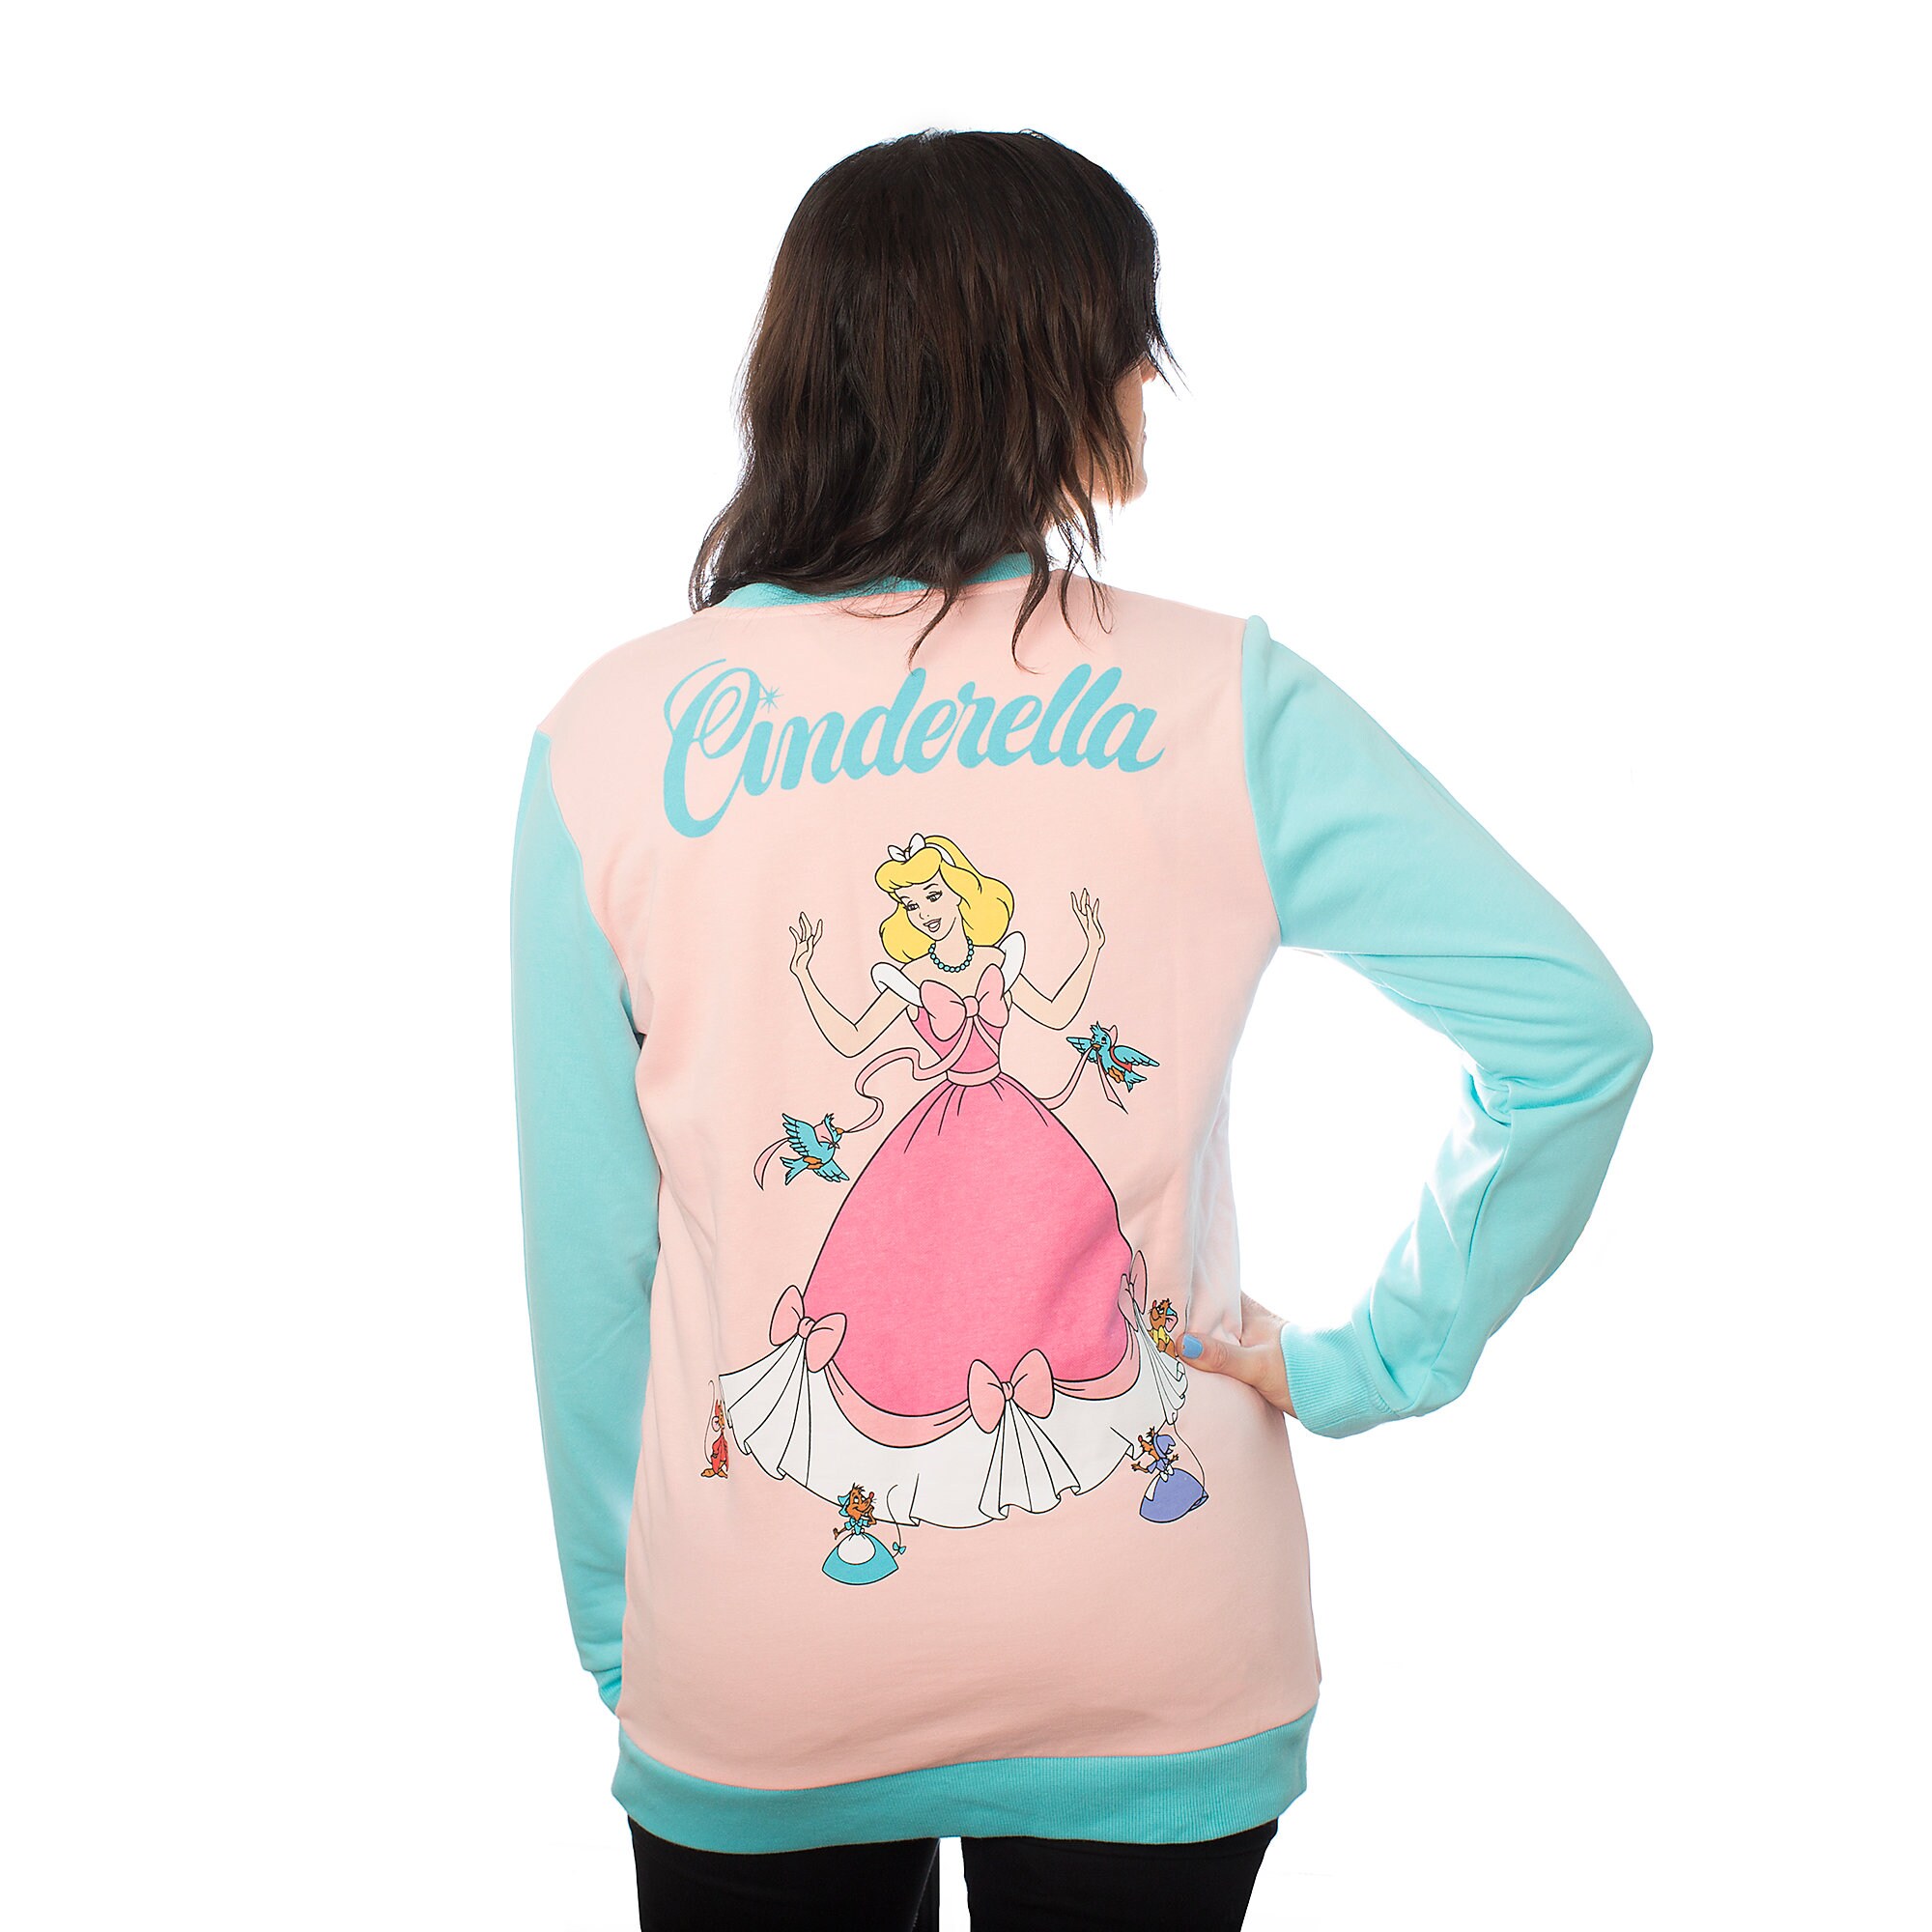 Cinderella Pullover for Adults by Cakeworthy